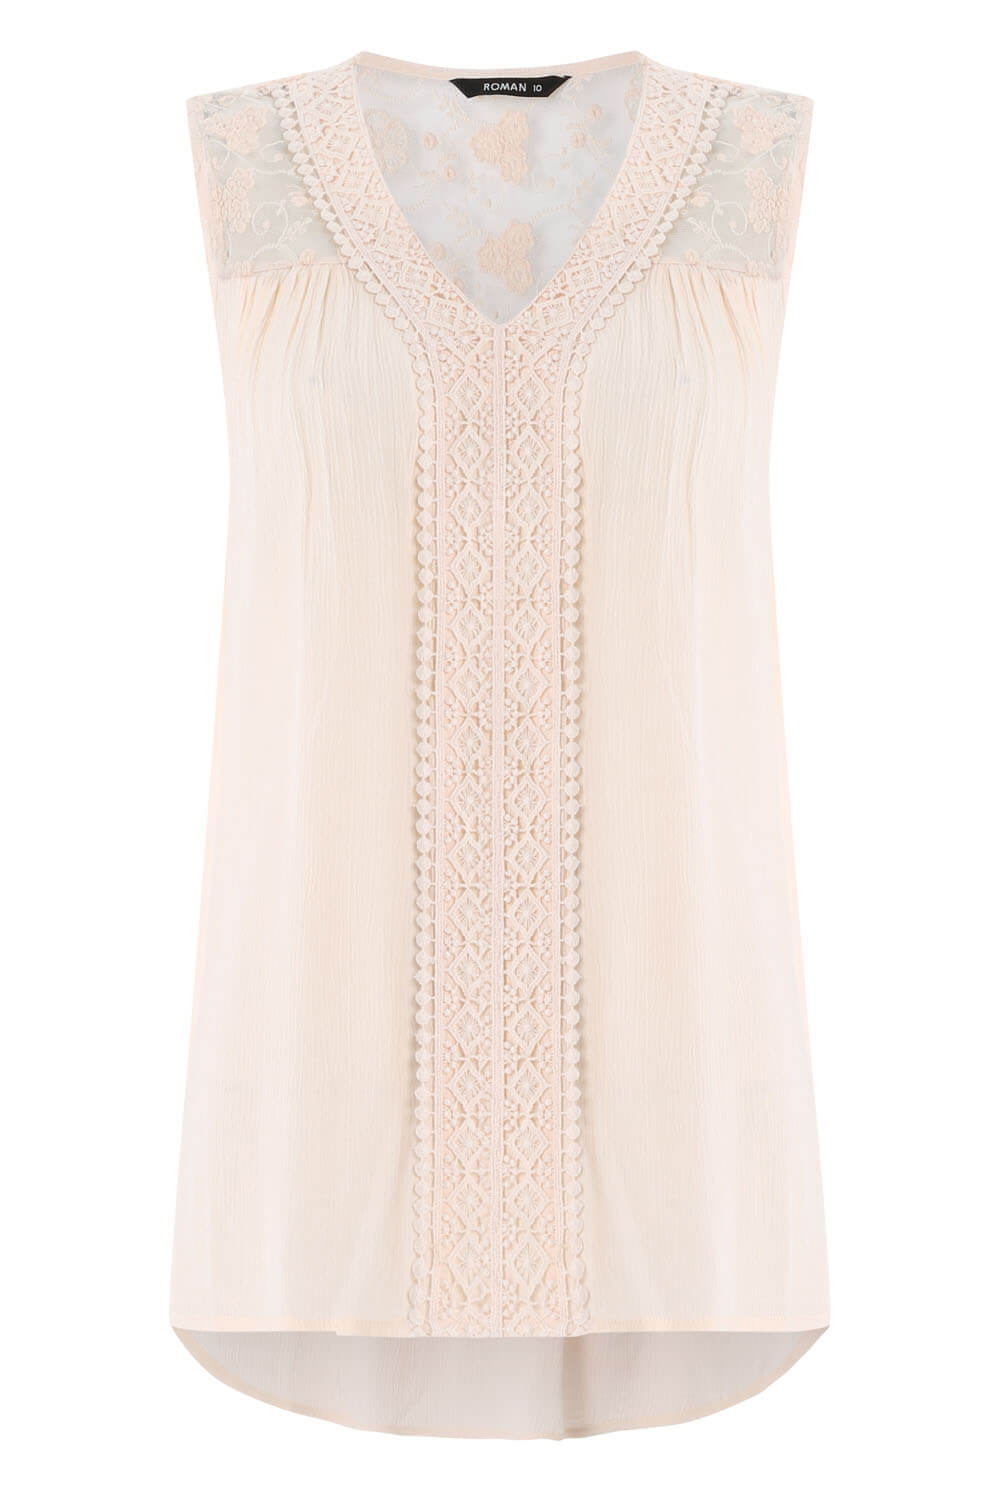 Light Pink Lace Insert Sleeveless Top , Image 4 of 4